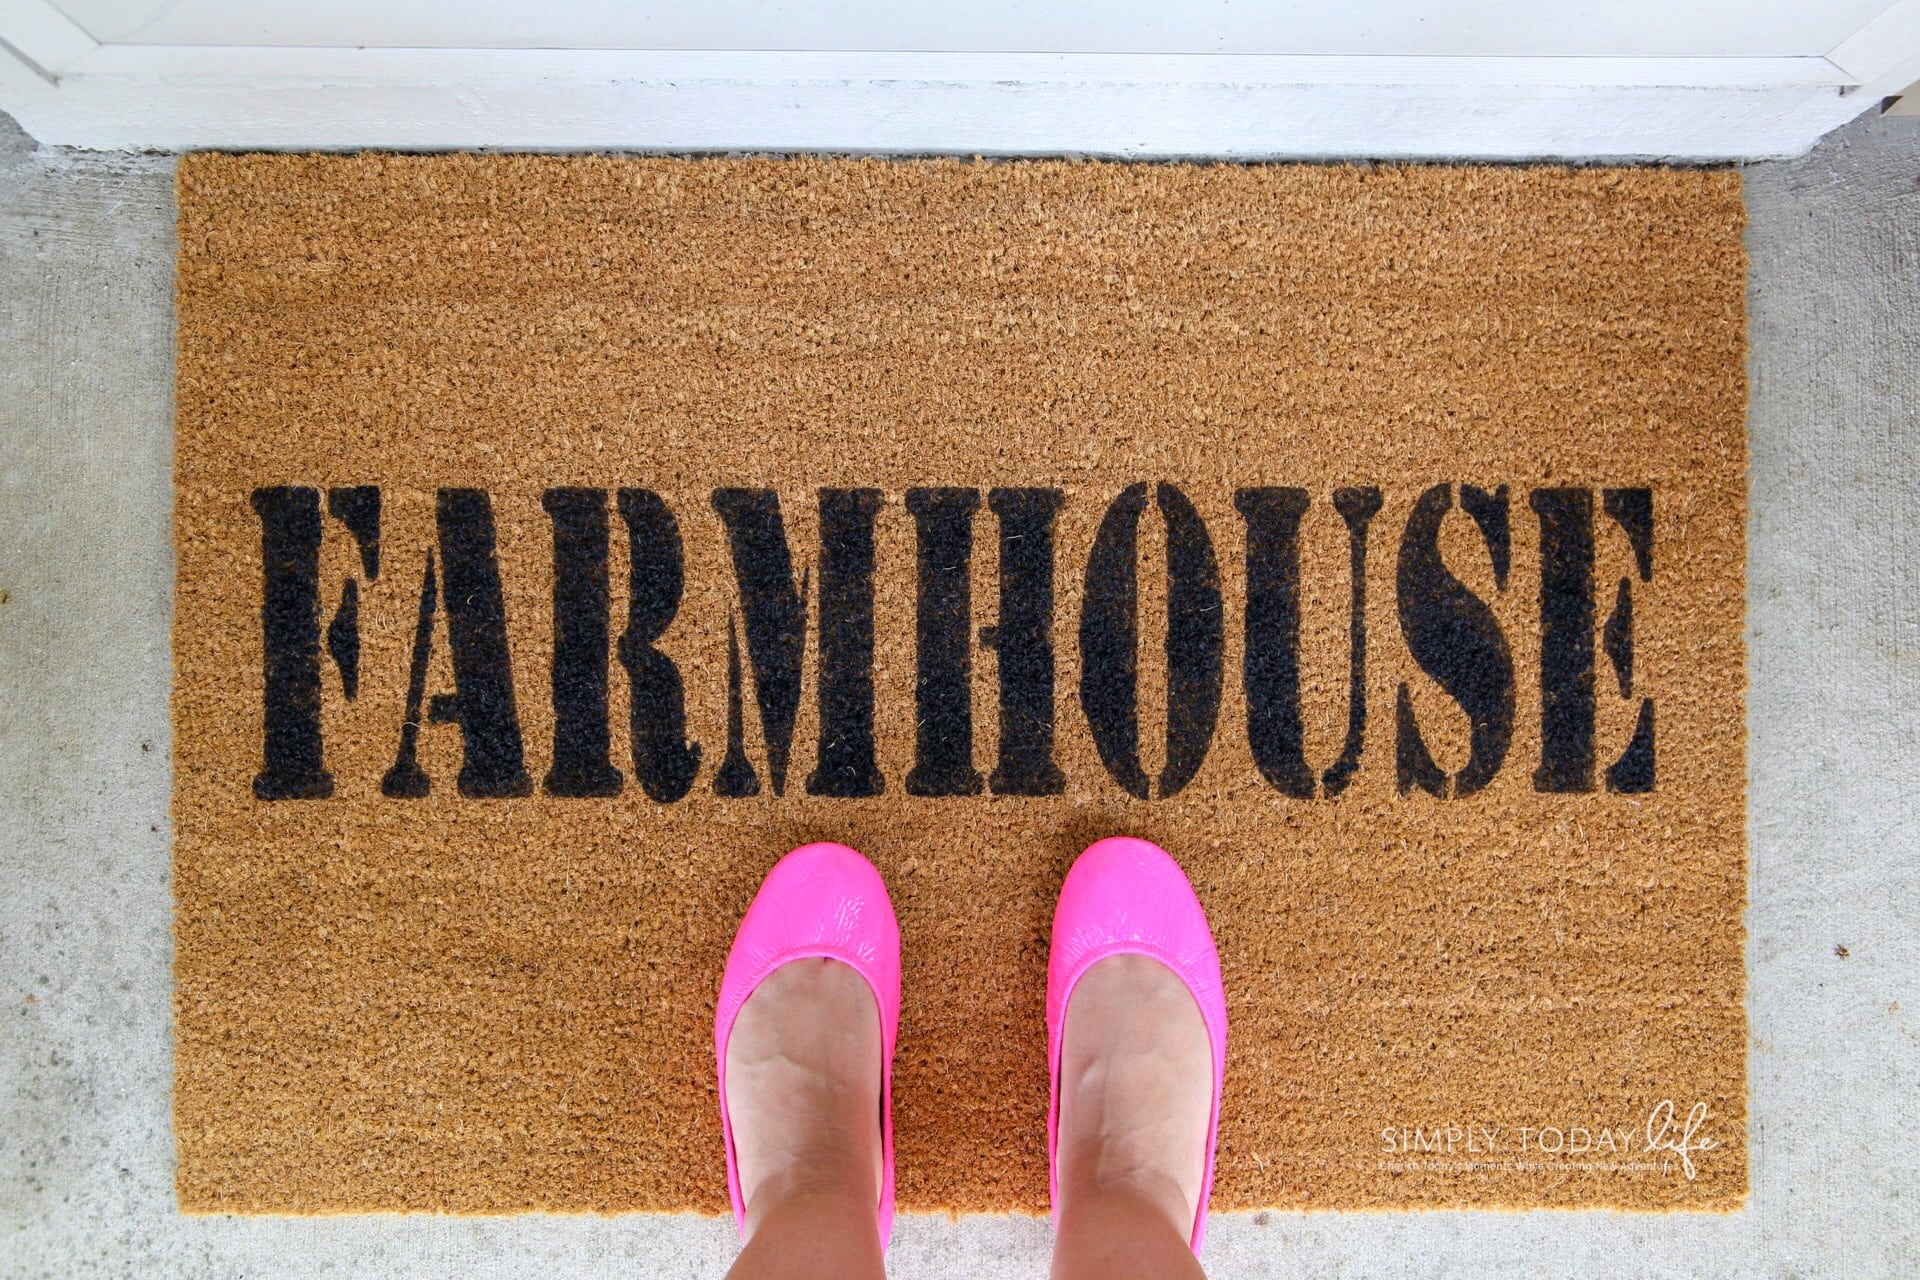 How To Paint A Custom Doormat With Chalk Paint